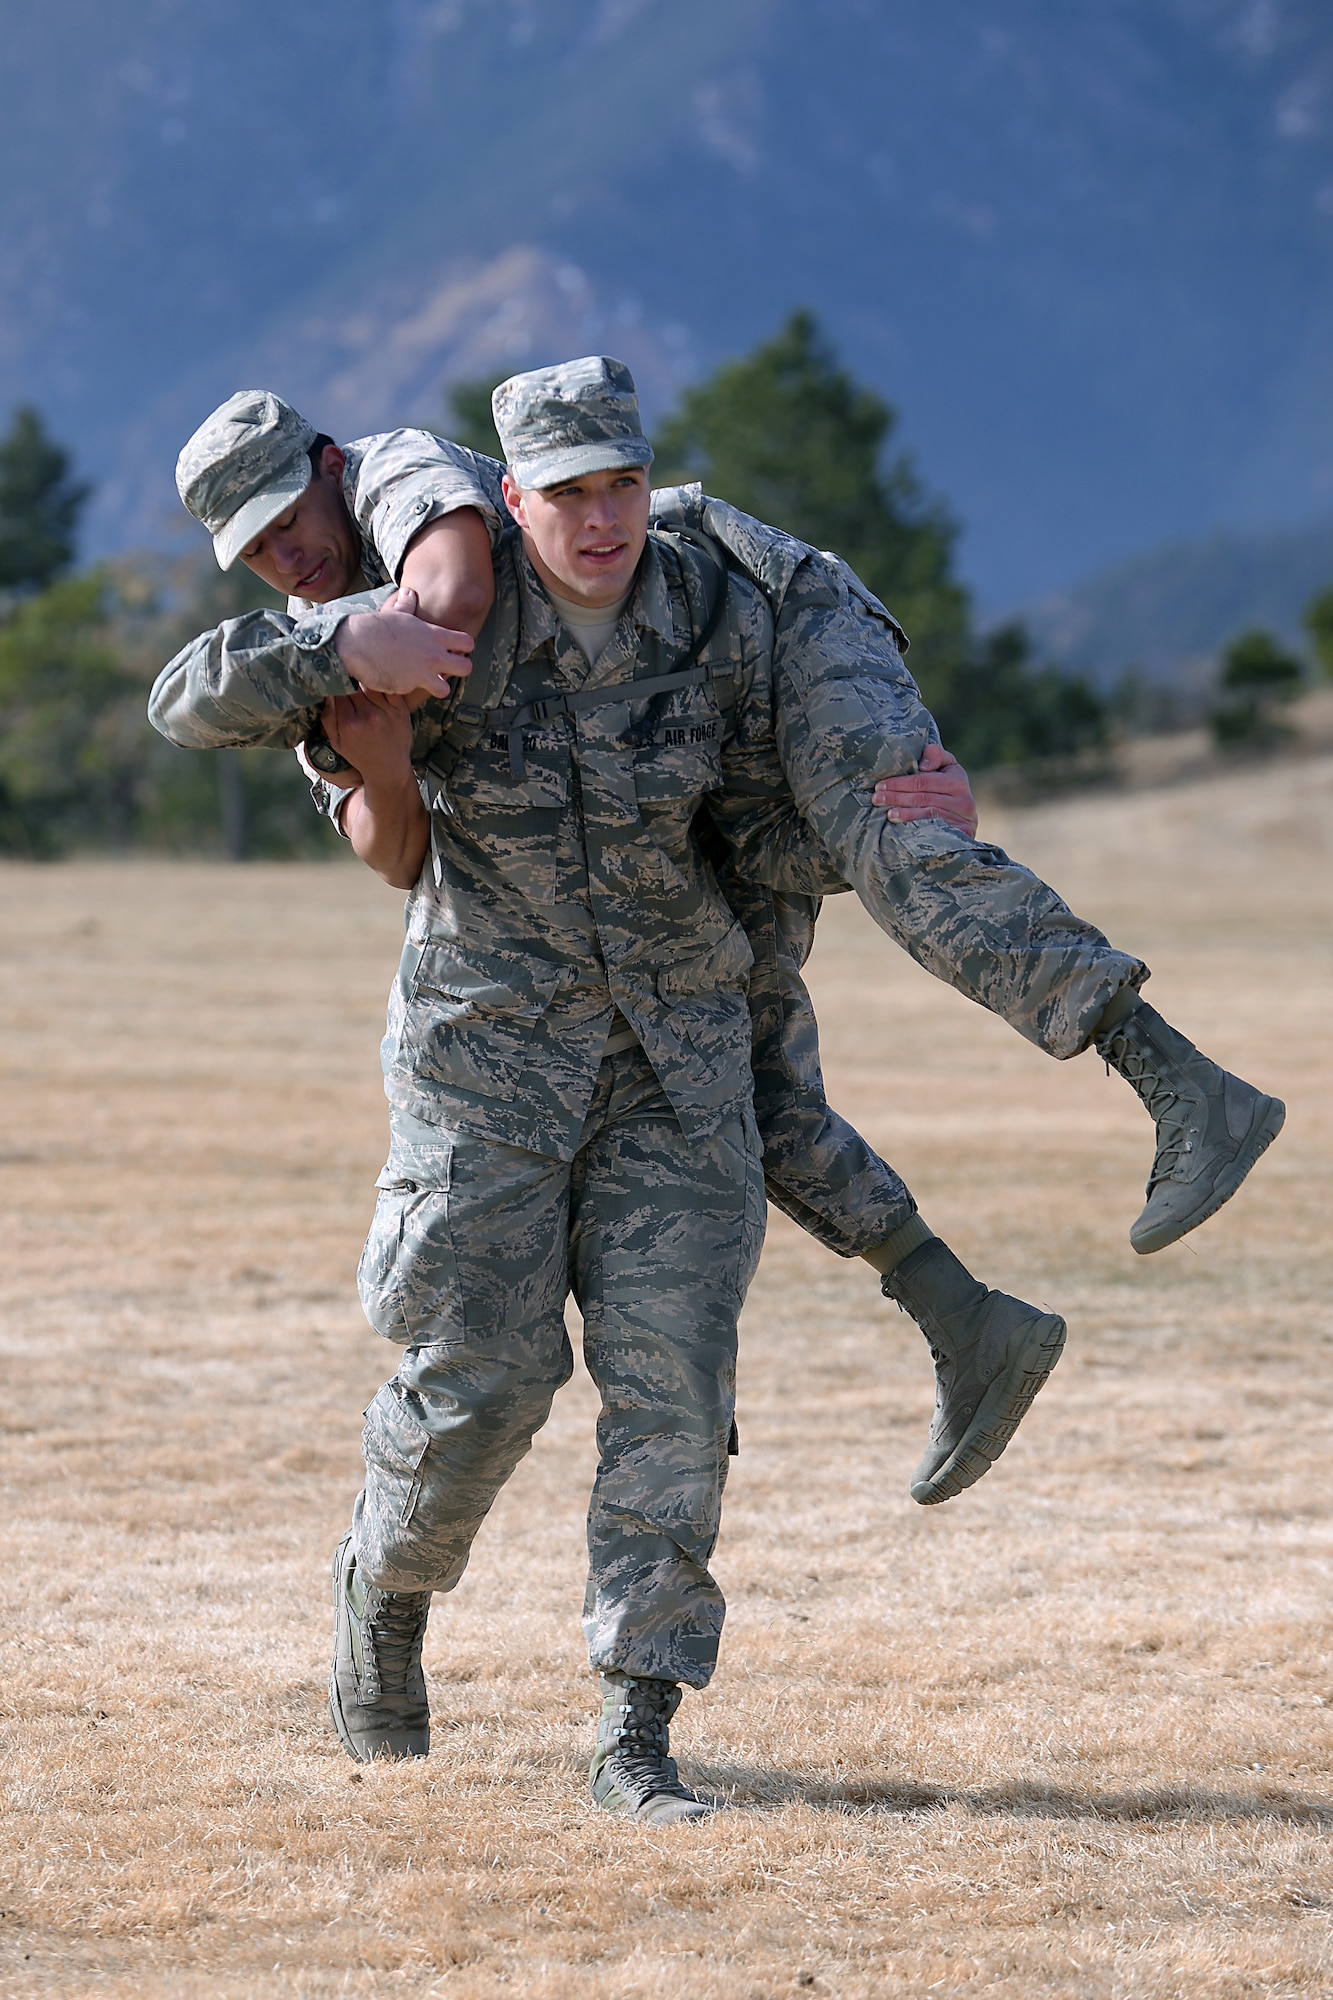 A freshman cadet at the U.S. Air Force Academy, Colorado,uses the "fireman's carry" to carry another freshman March 10, 2017 during Recognition. Recognition is a rigorous annual event freshmen or "four degrees" must overcome before earning the title of cadet. (U.S. Air Force photo/Darcie Ibidapo)